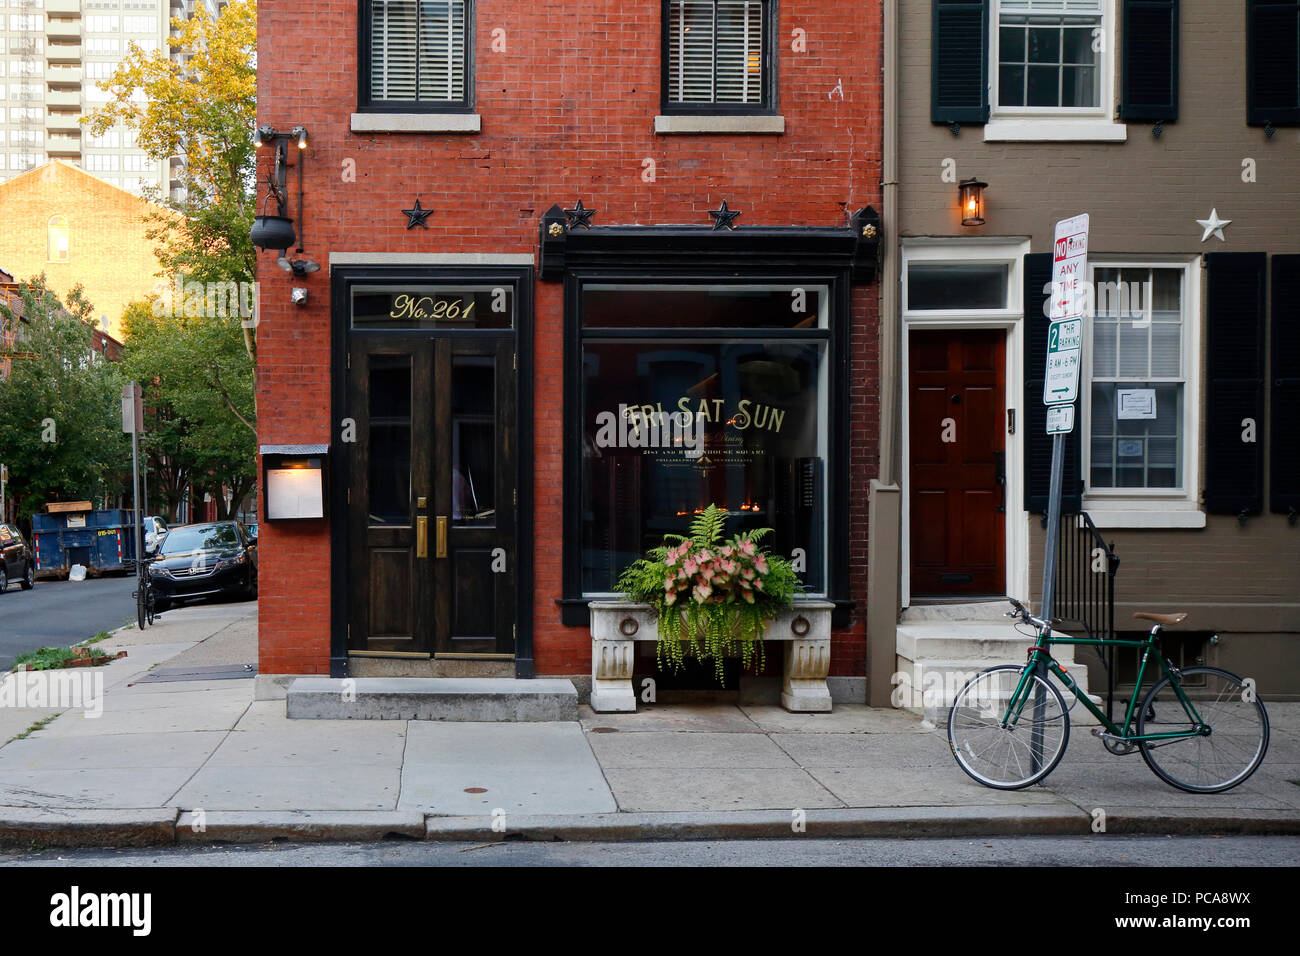 Friday Saturday Sunday, 261 S 21st St, Philadelphia, PA. exterior of a fine dining restaurant in center city Stock Photo